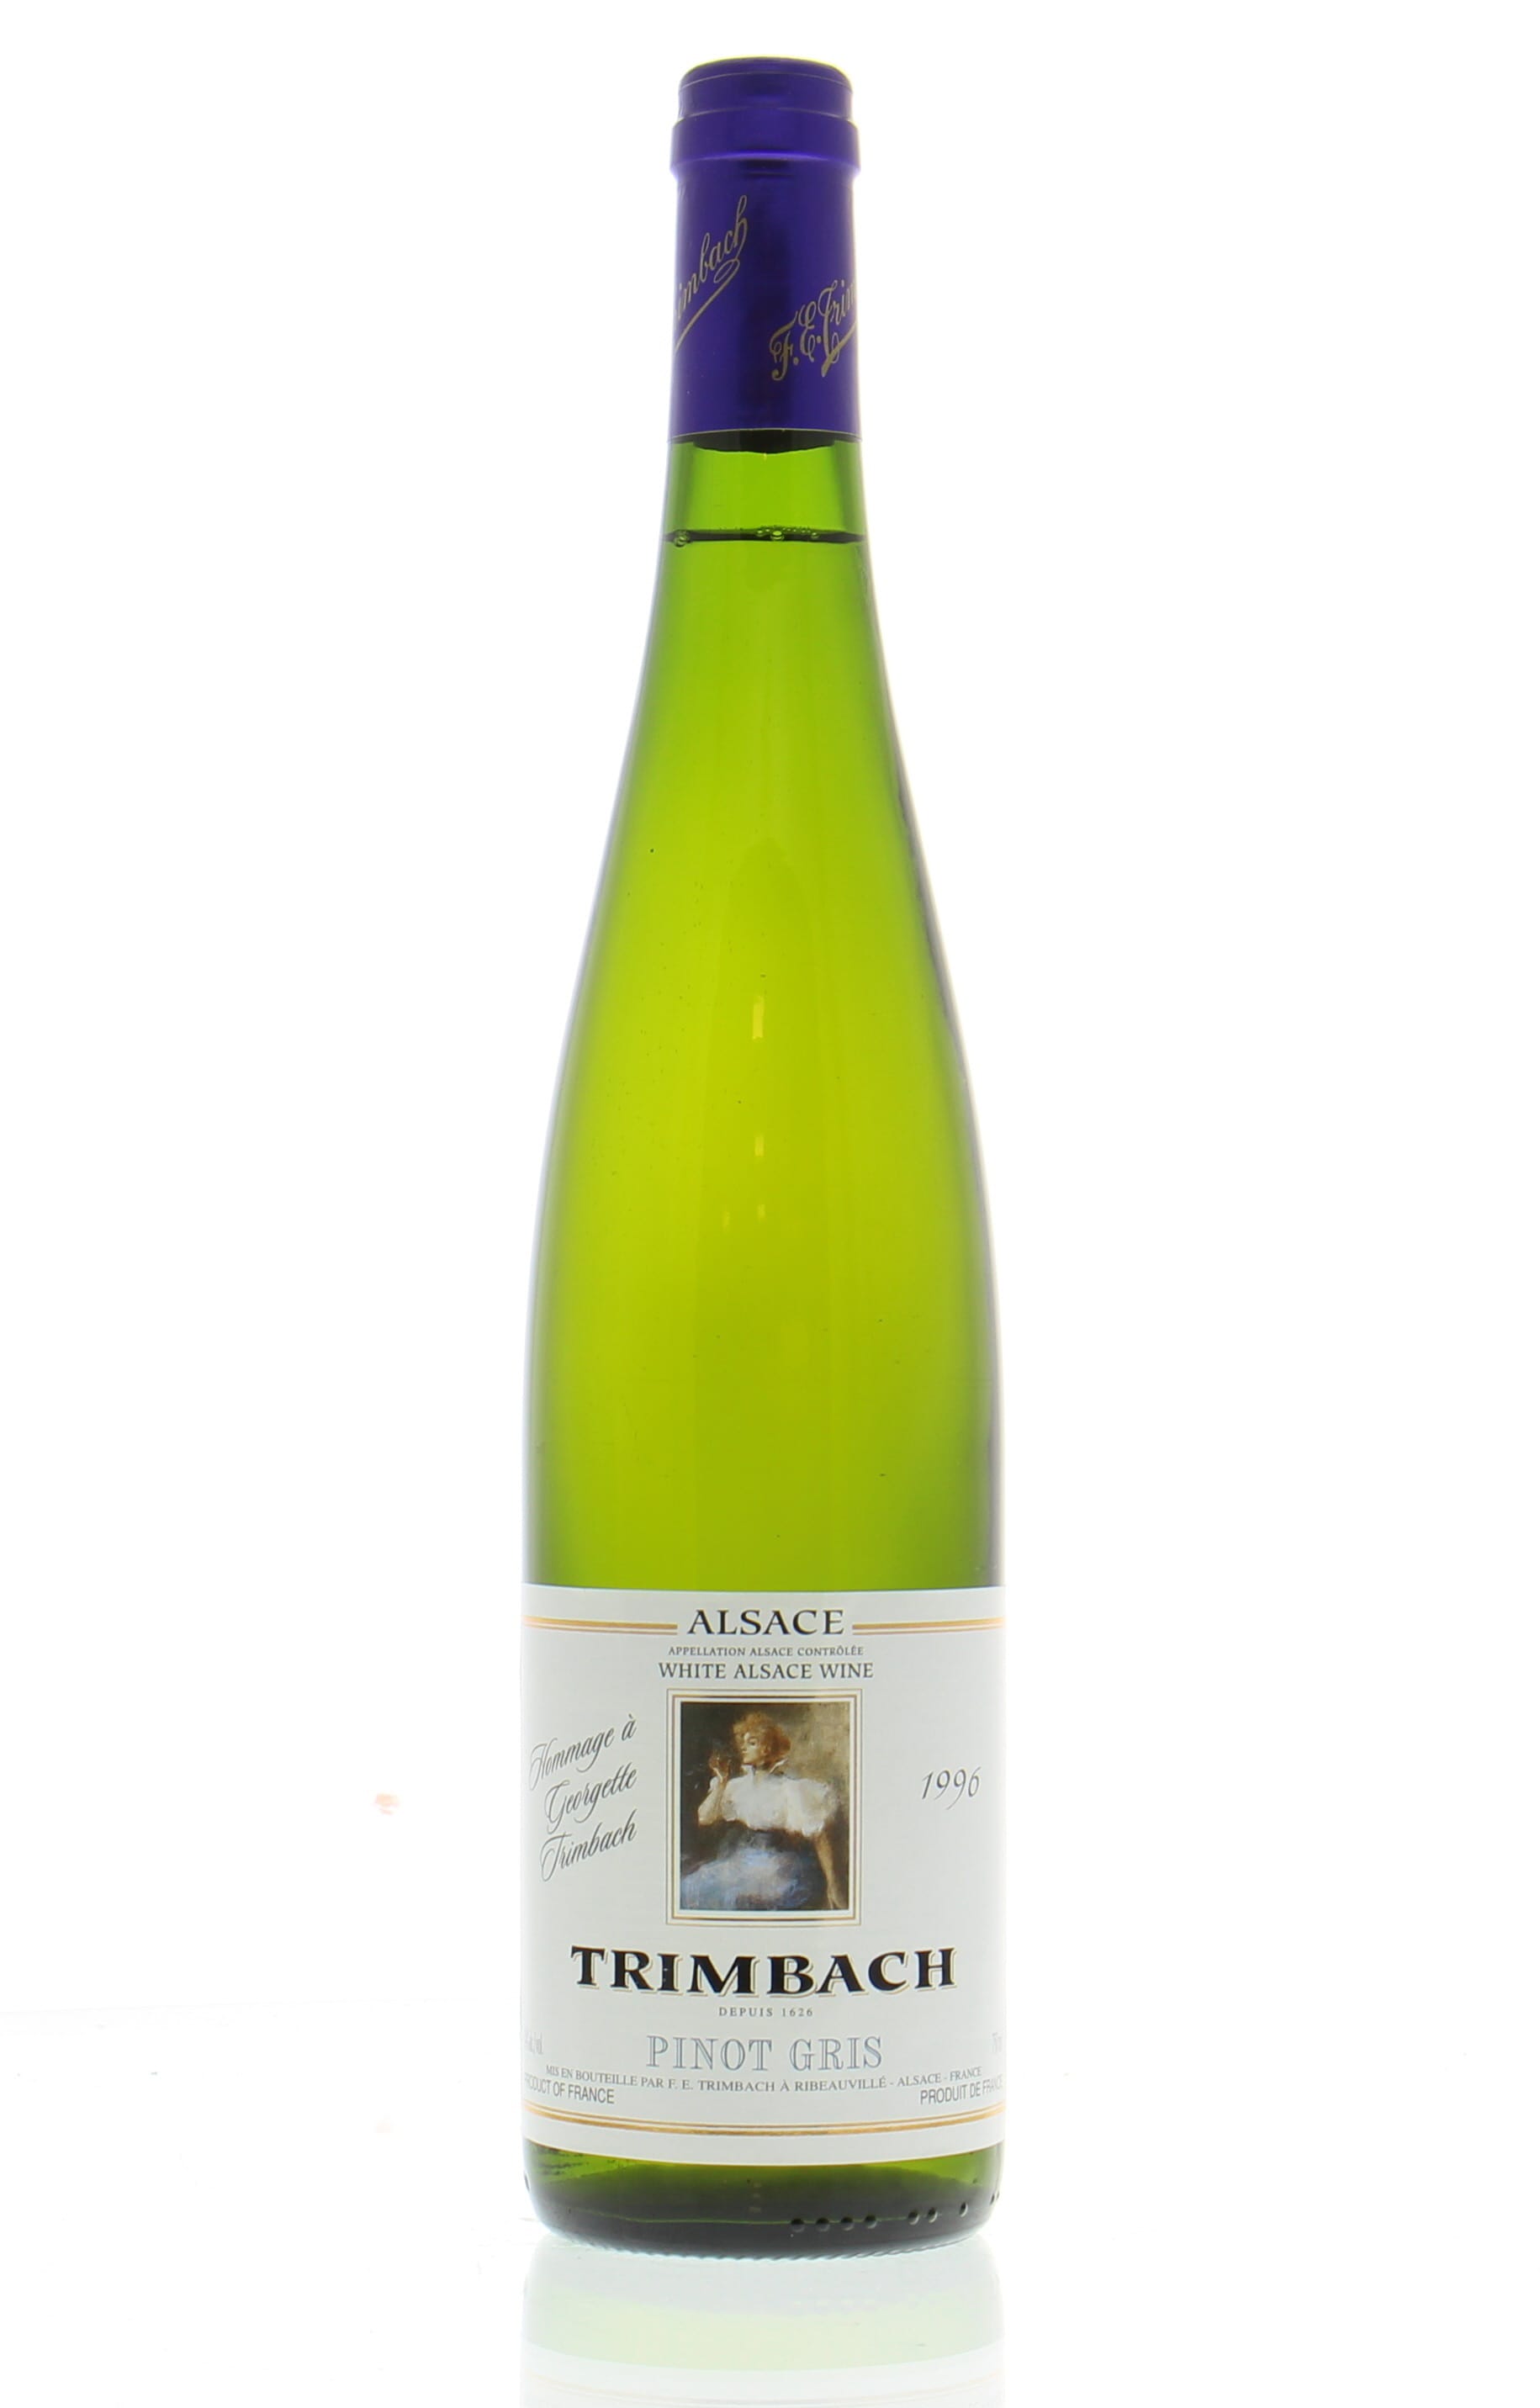 Trimbach - Pinot Gris 'Hommage a Georgette' 1996